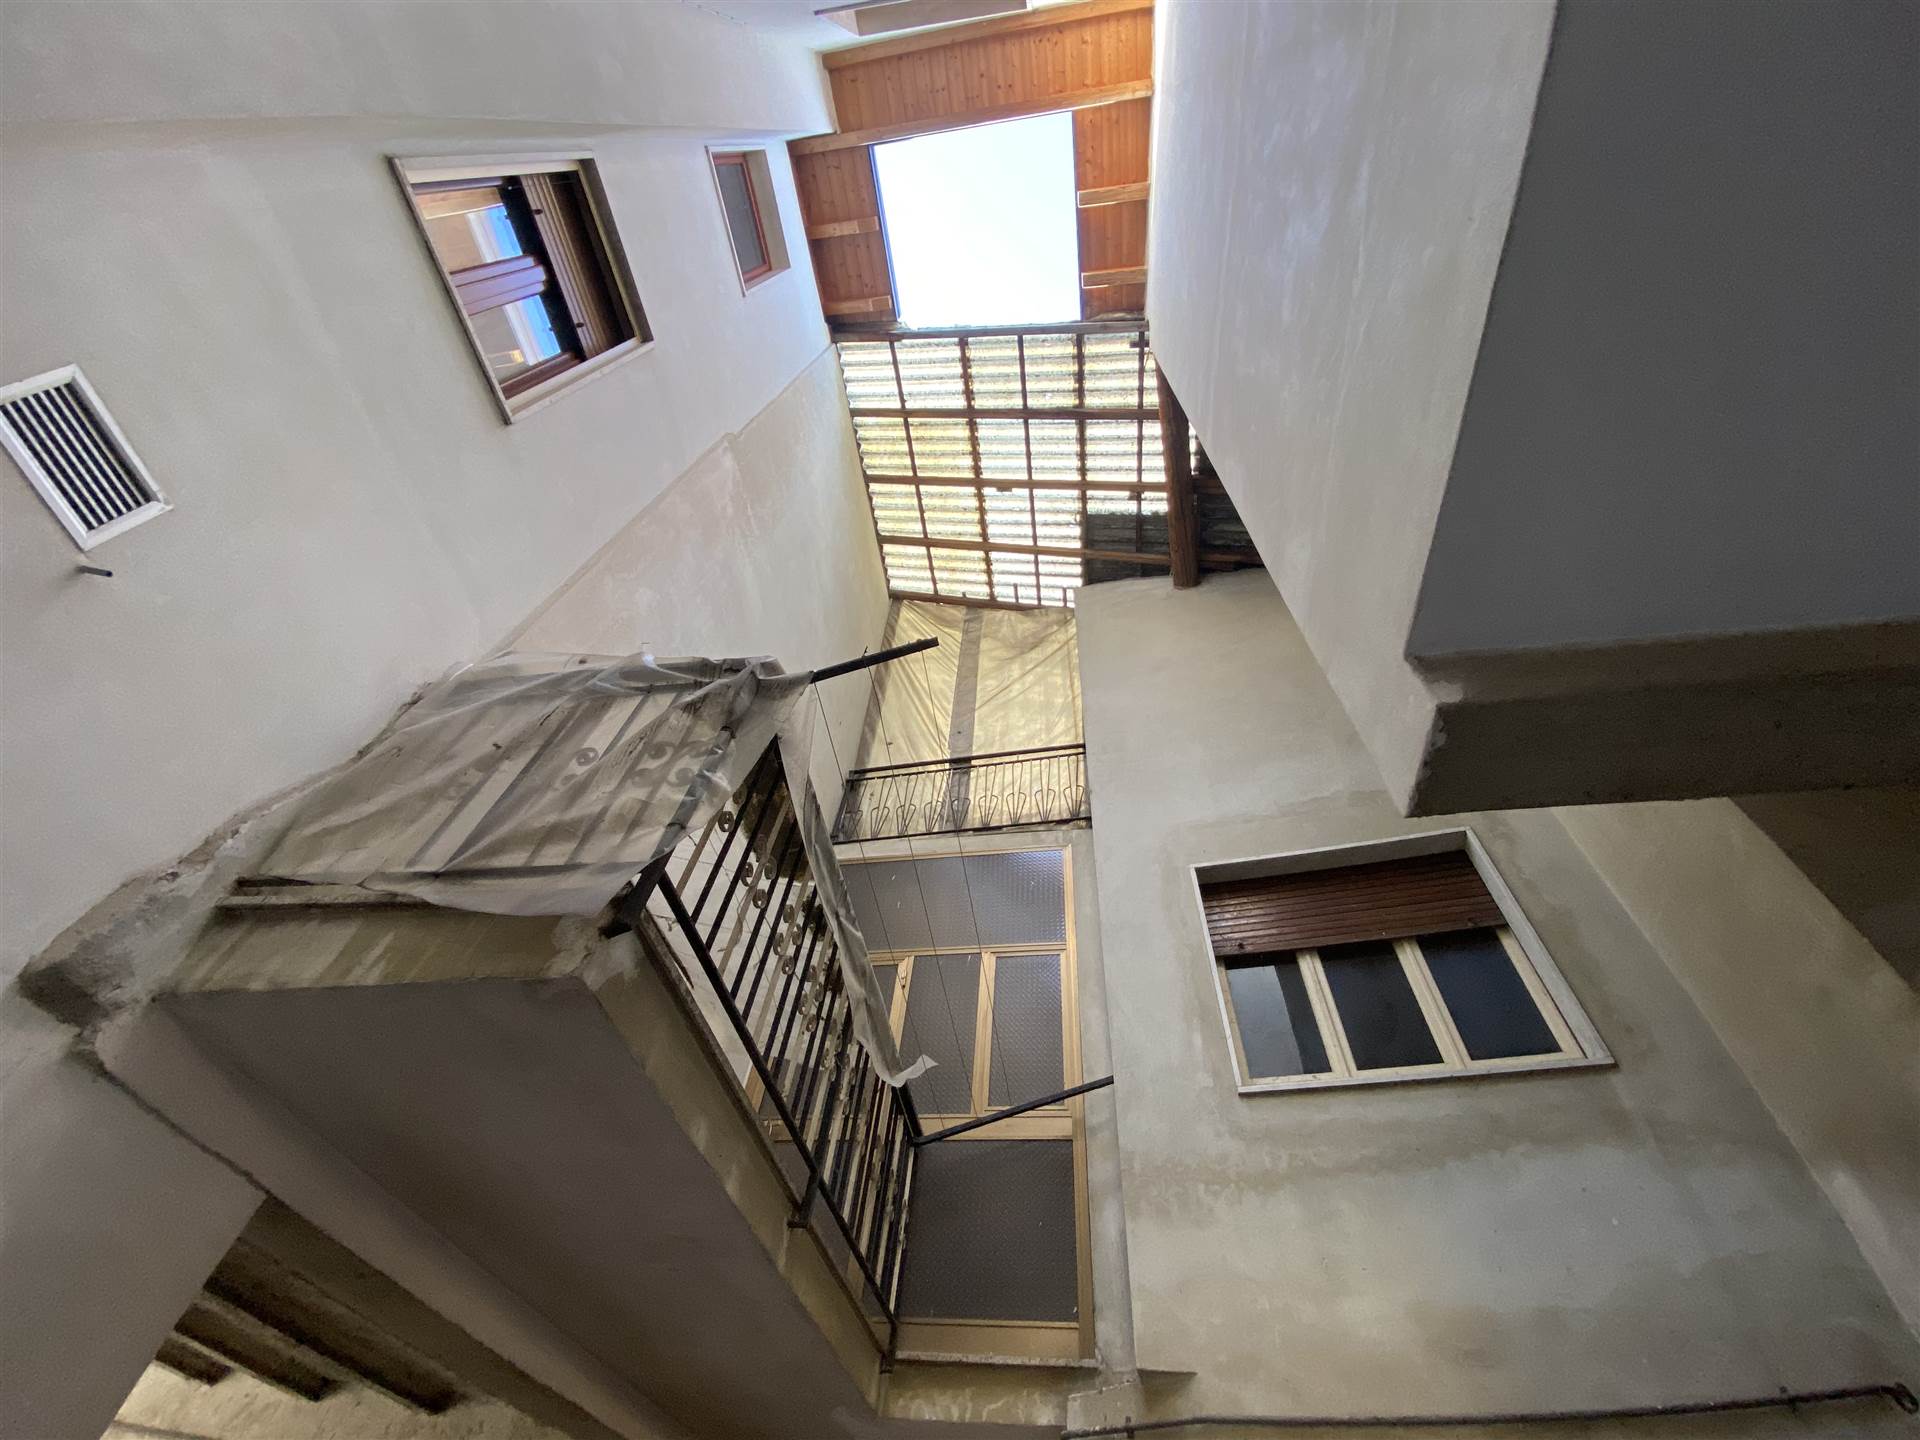 POGNANO, Rustic farmhouse for sale of 390 Sq. mt., Be restored, Energetic class: Not subject, composed by: 11 Rooms, Separate kitchen, , Price: € 65,